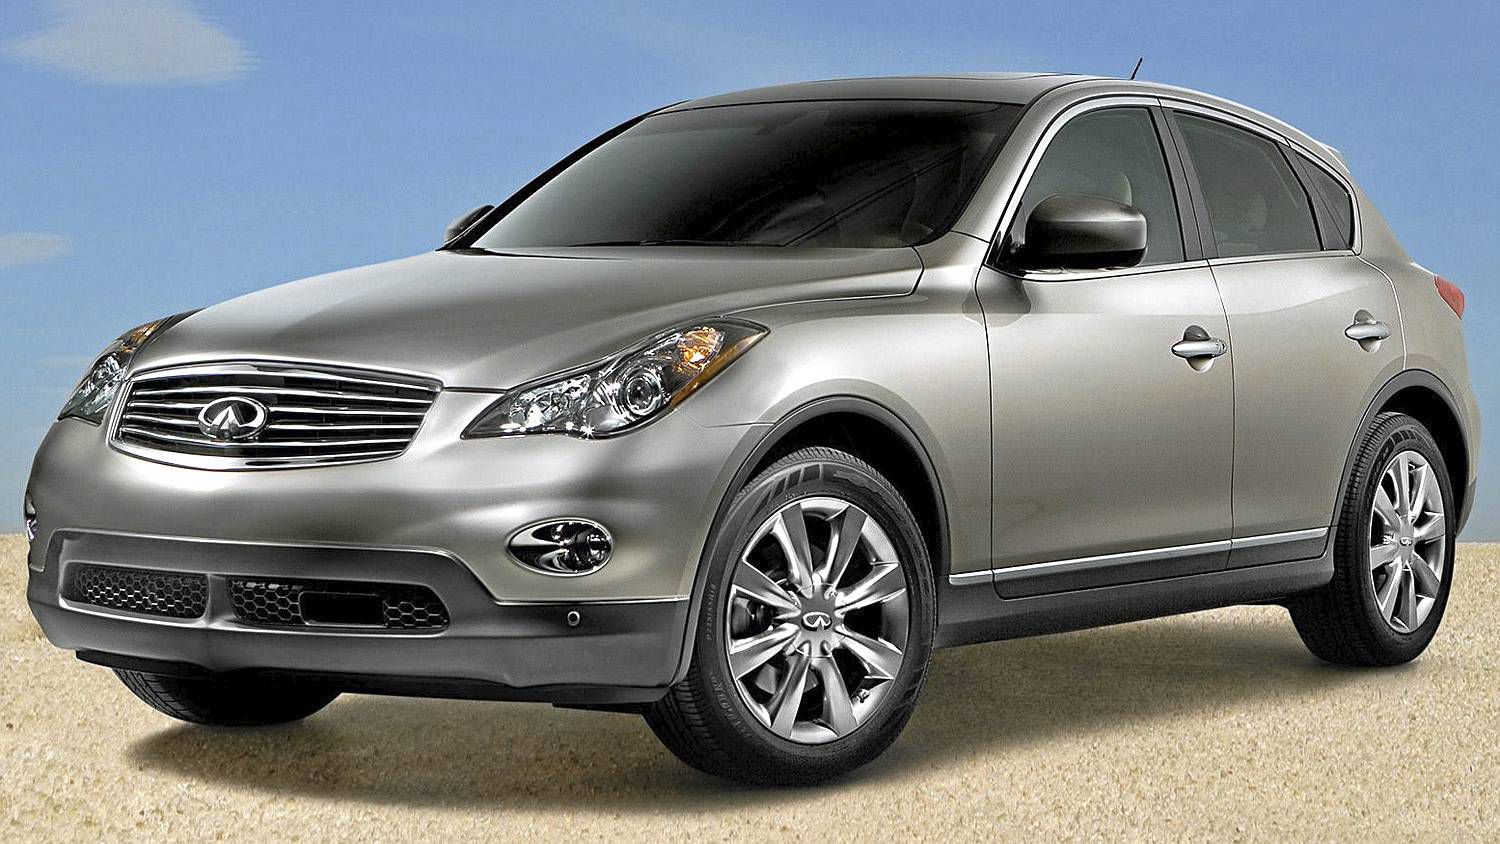 Review: Infiniti EX35 is the real deal - The Globe and Mail